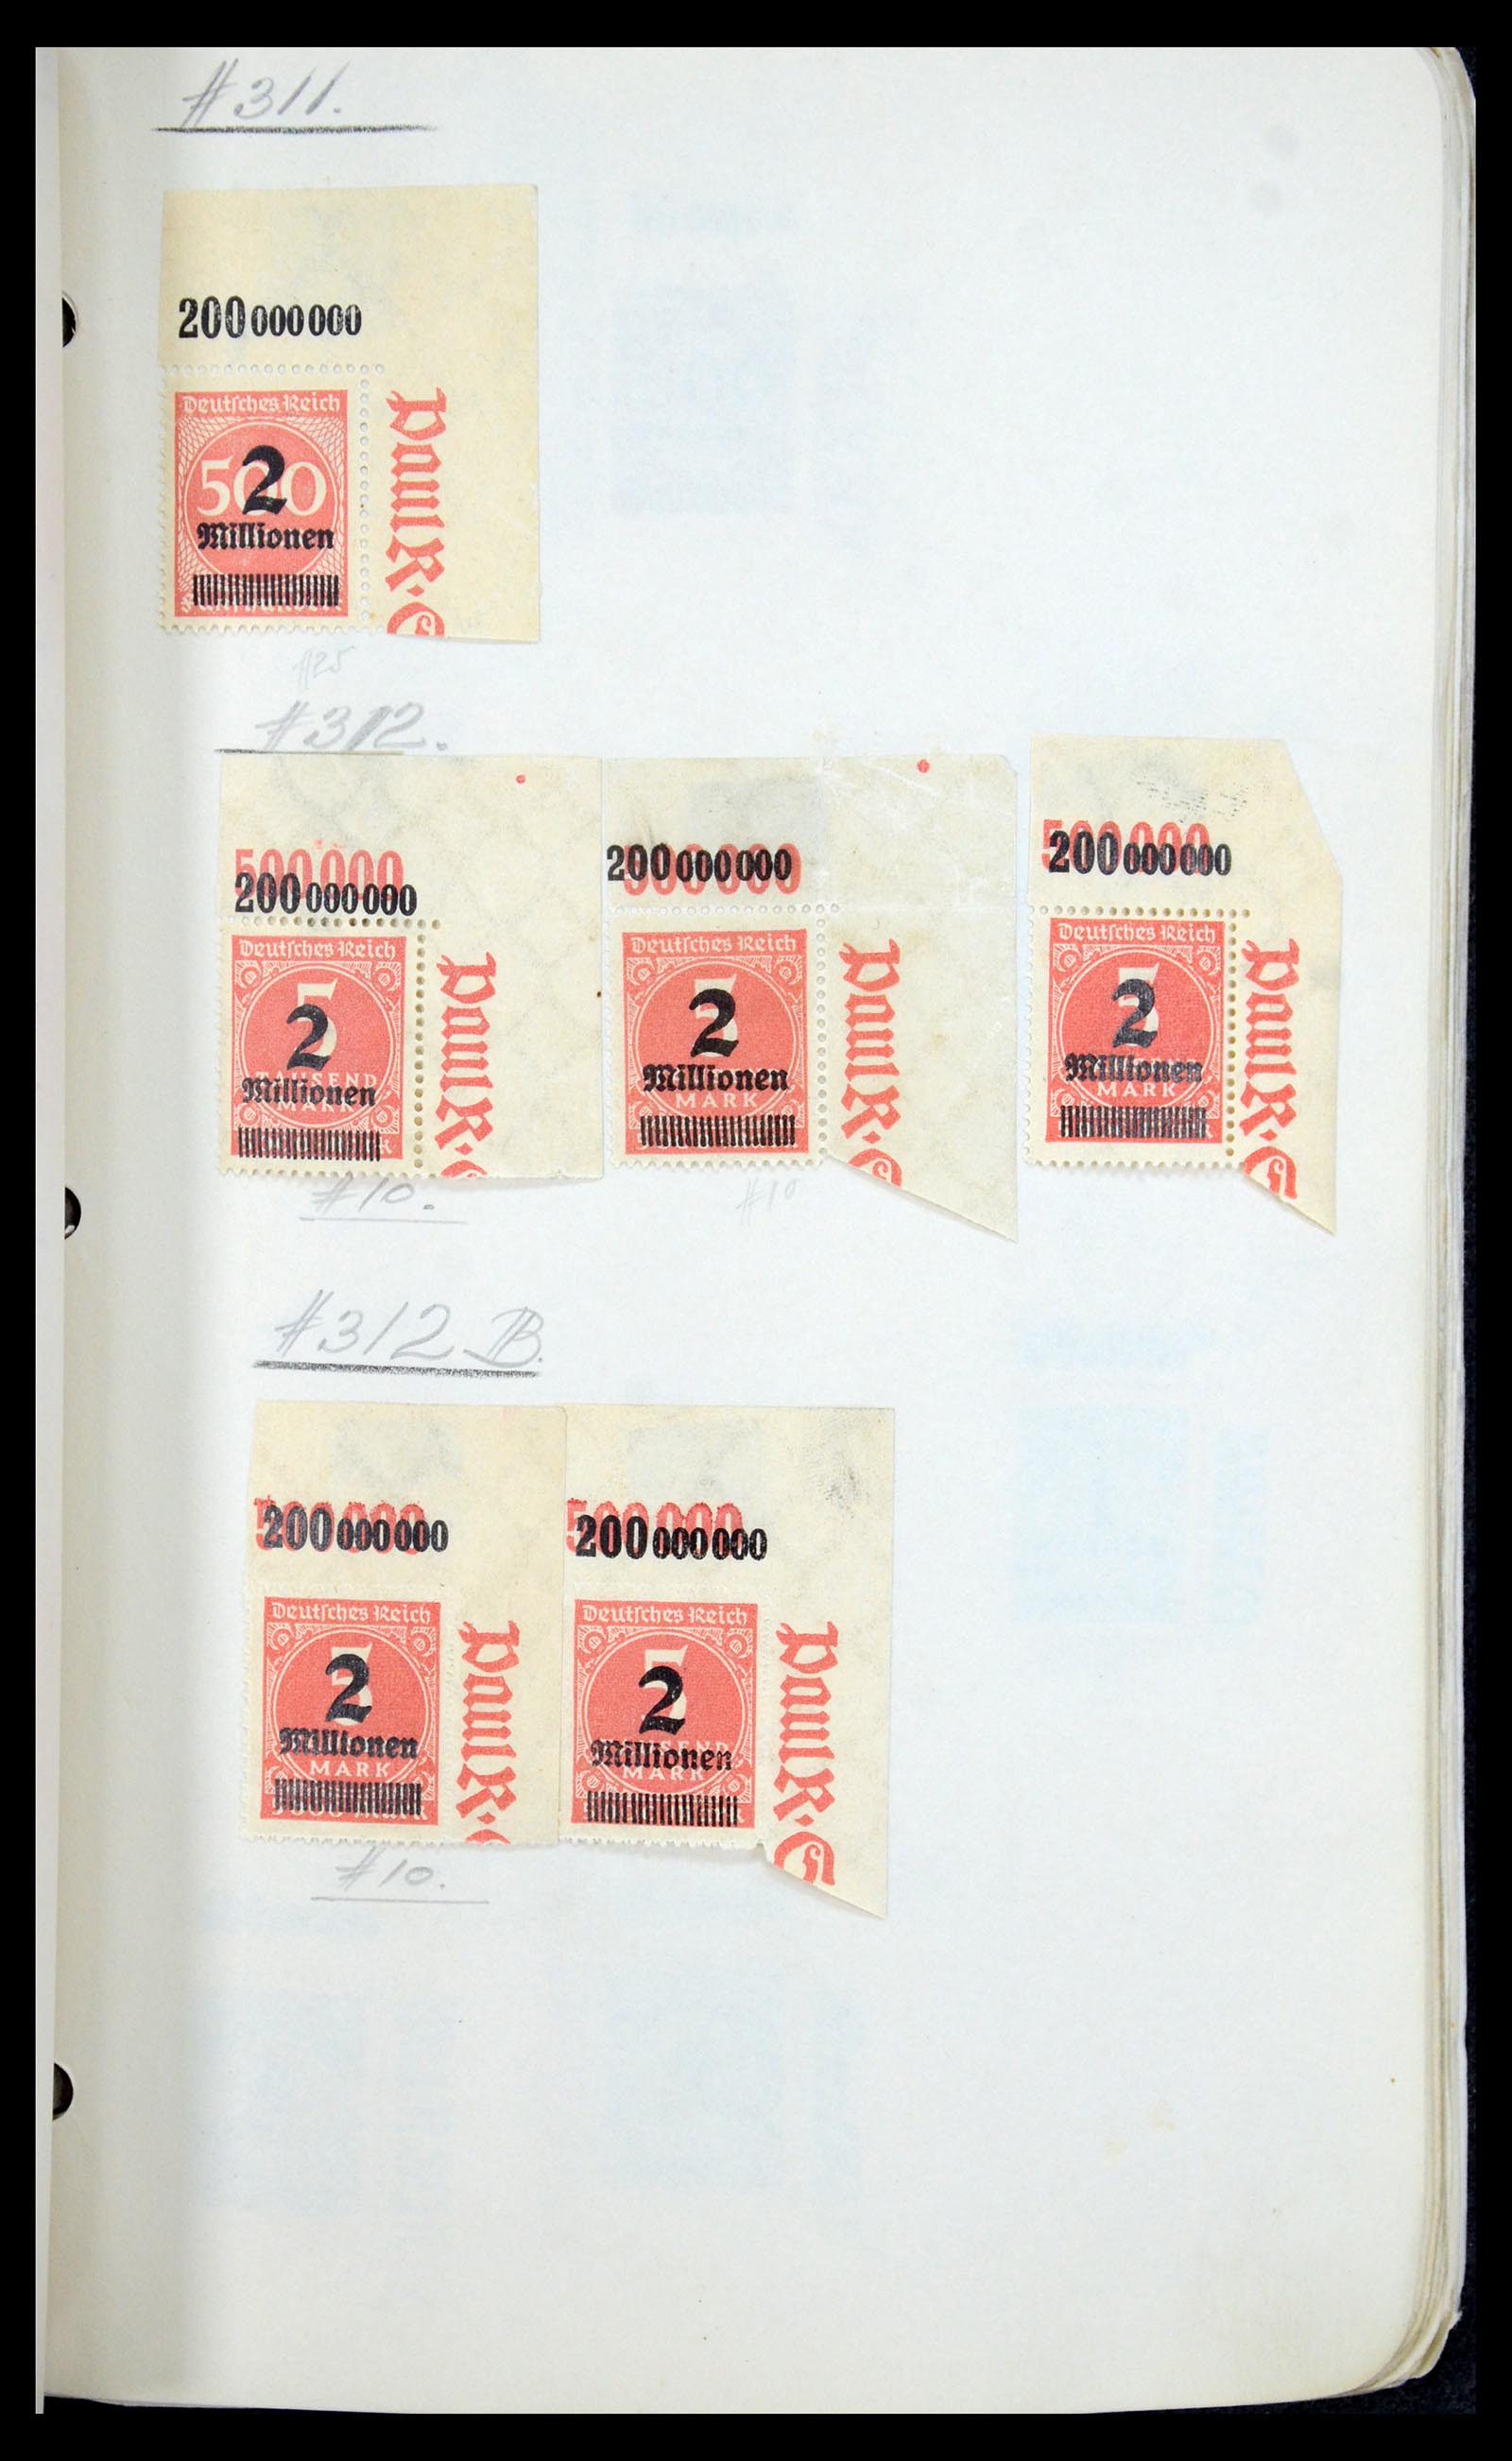 35565 024 - Stamp Collection 35565 German Reich infla 1919-1923.